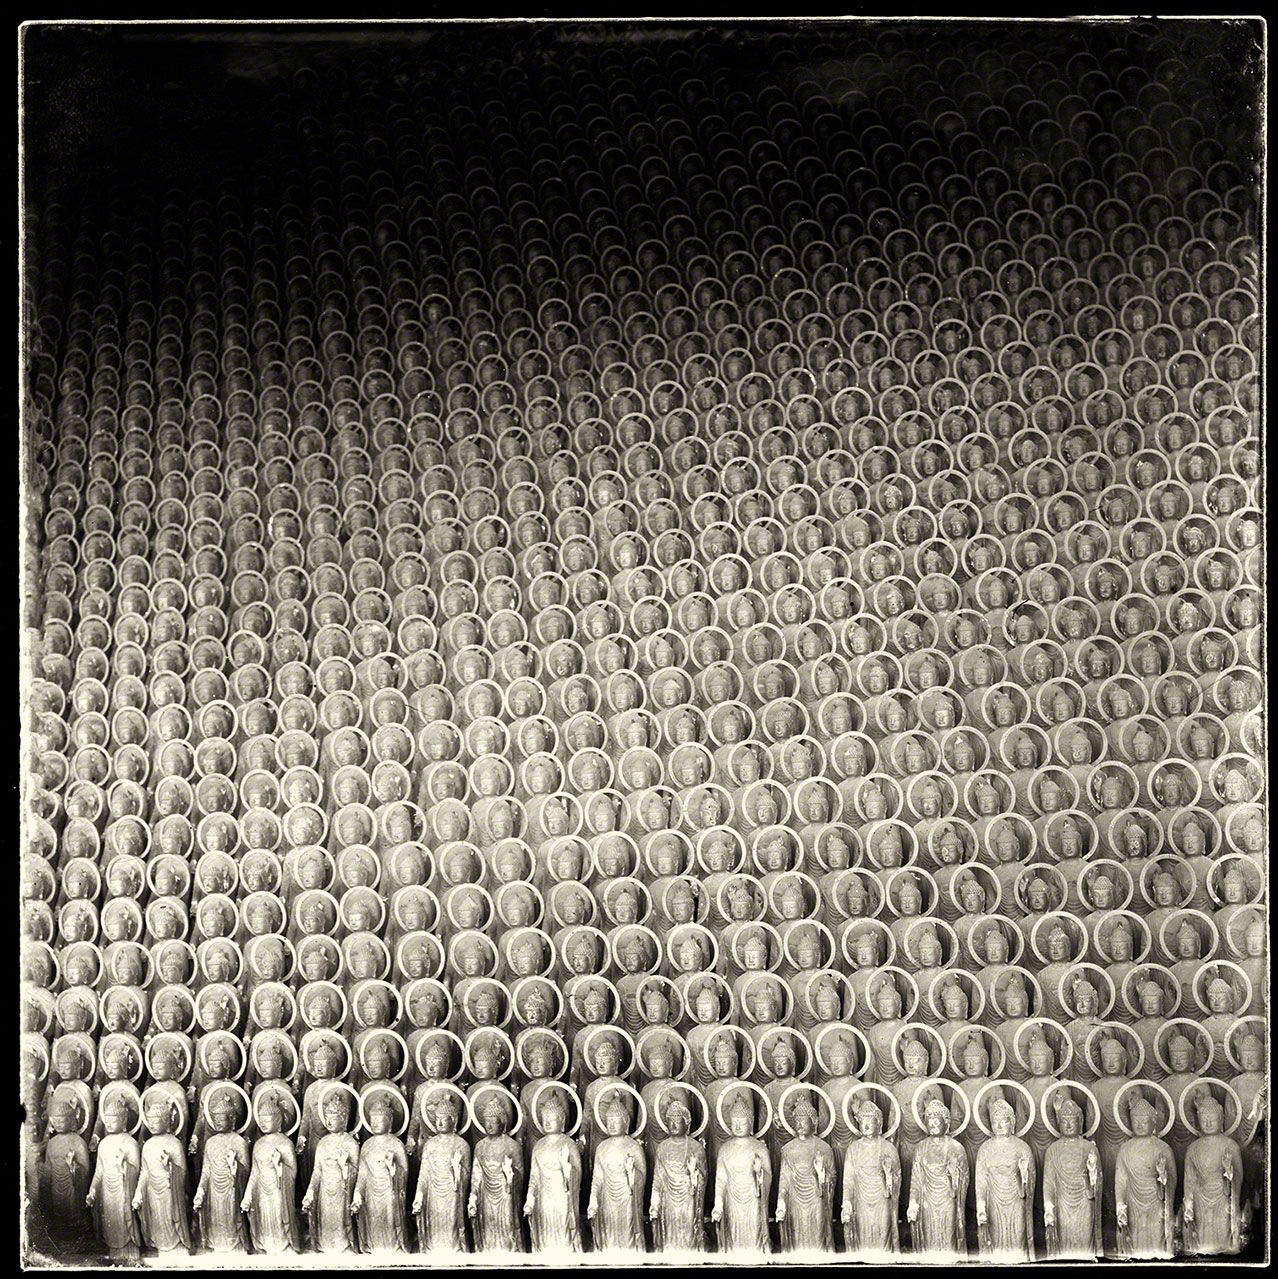 A view of the 84,000 Buddhist statues at Izumo’s Ichibata Yakushi temple. Worshippers come to the temple to heal eye ailments.